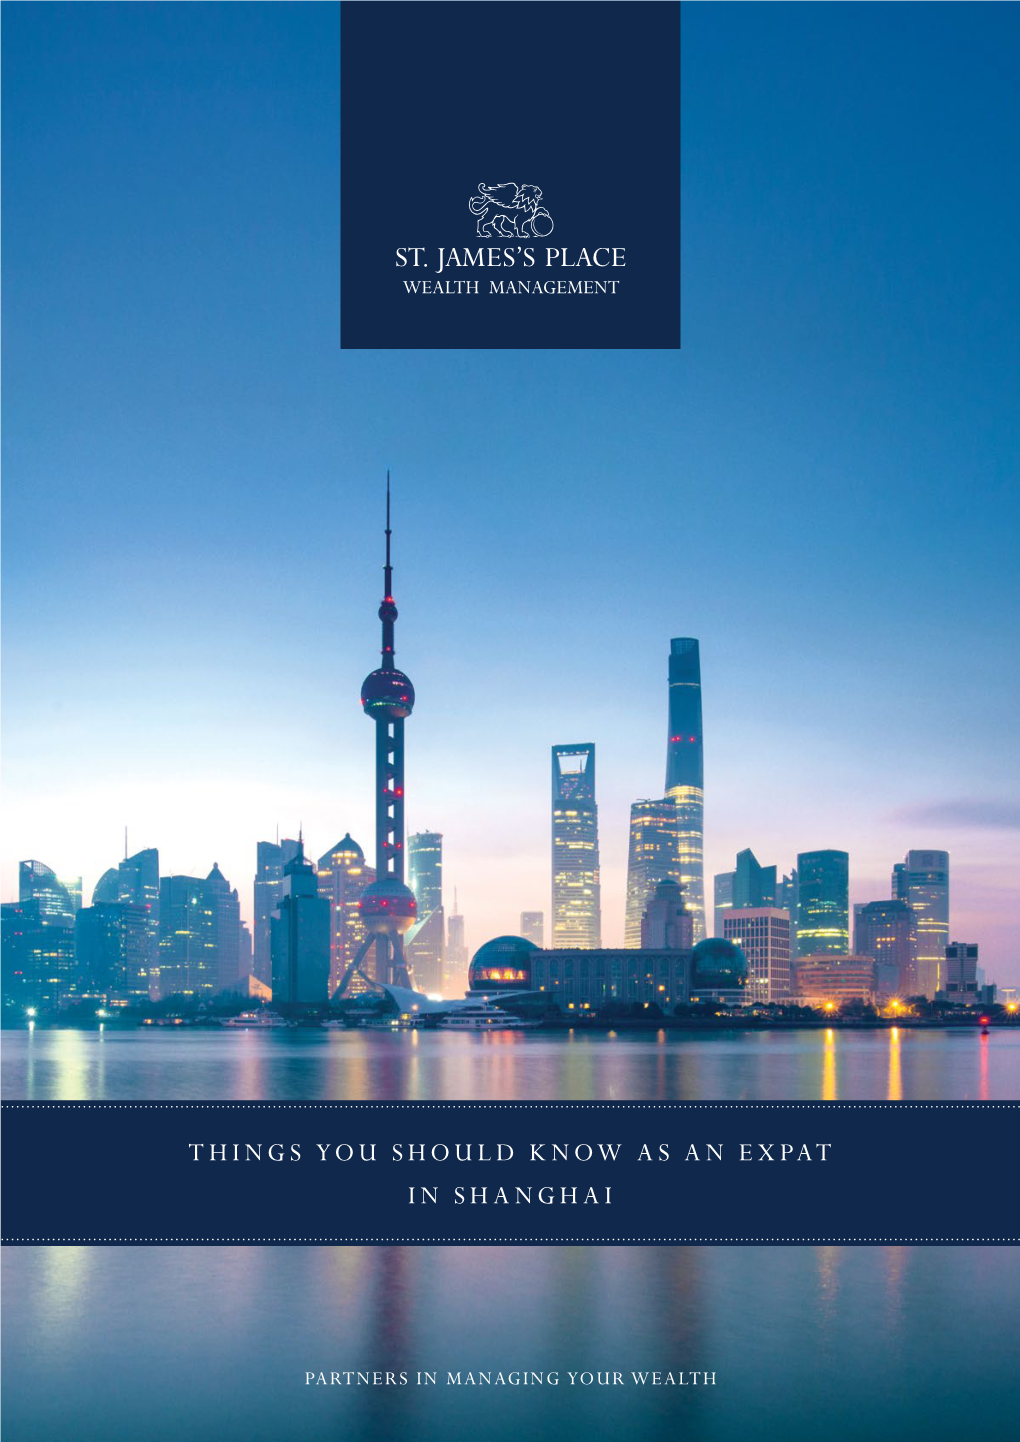 Things You Should Know as an Expat in Shanghai